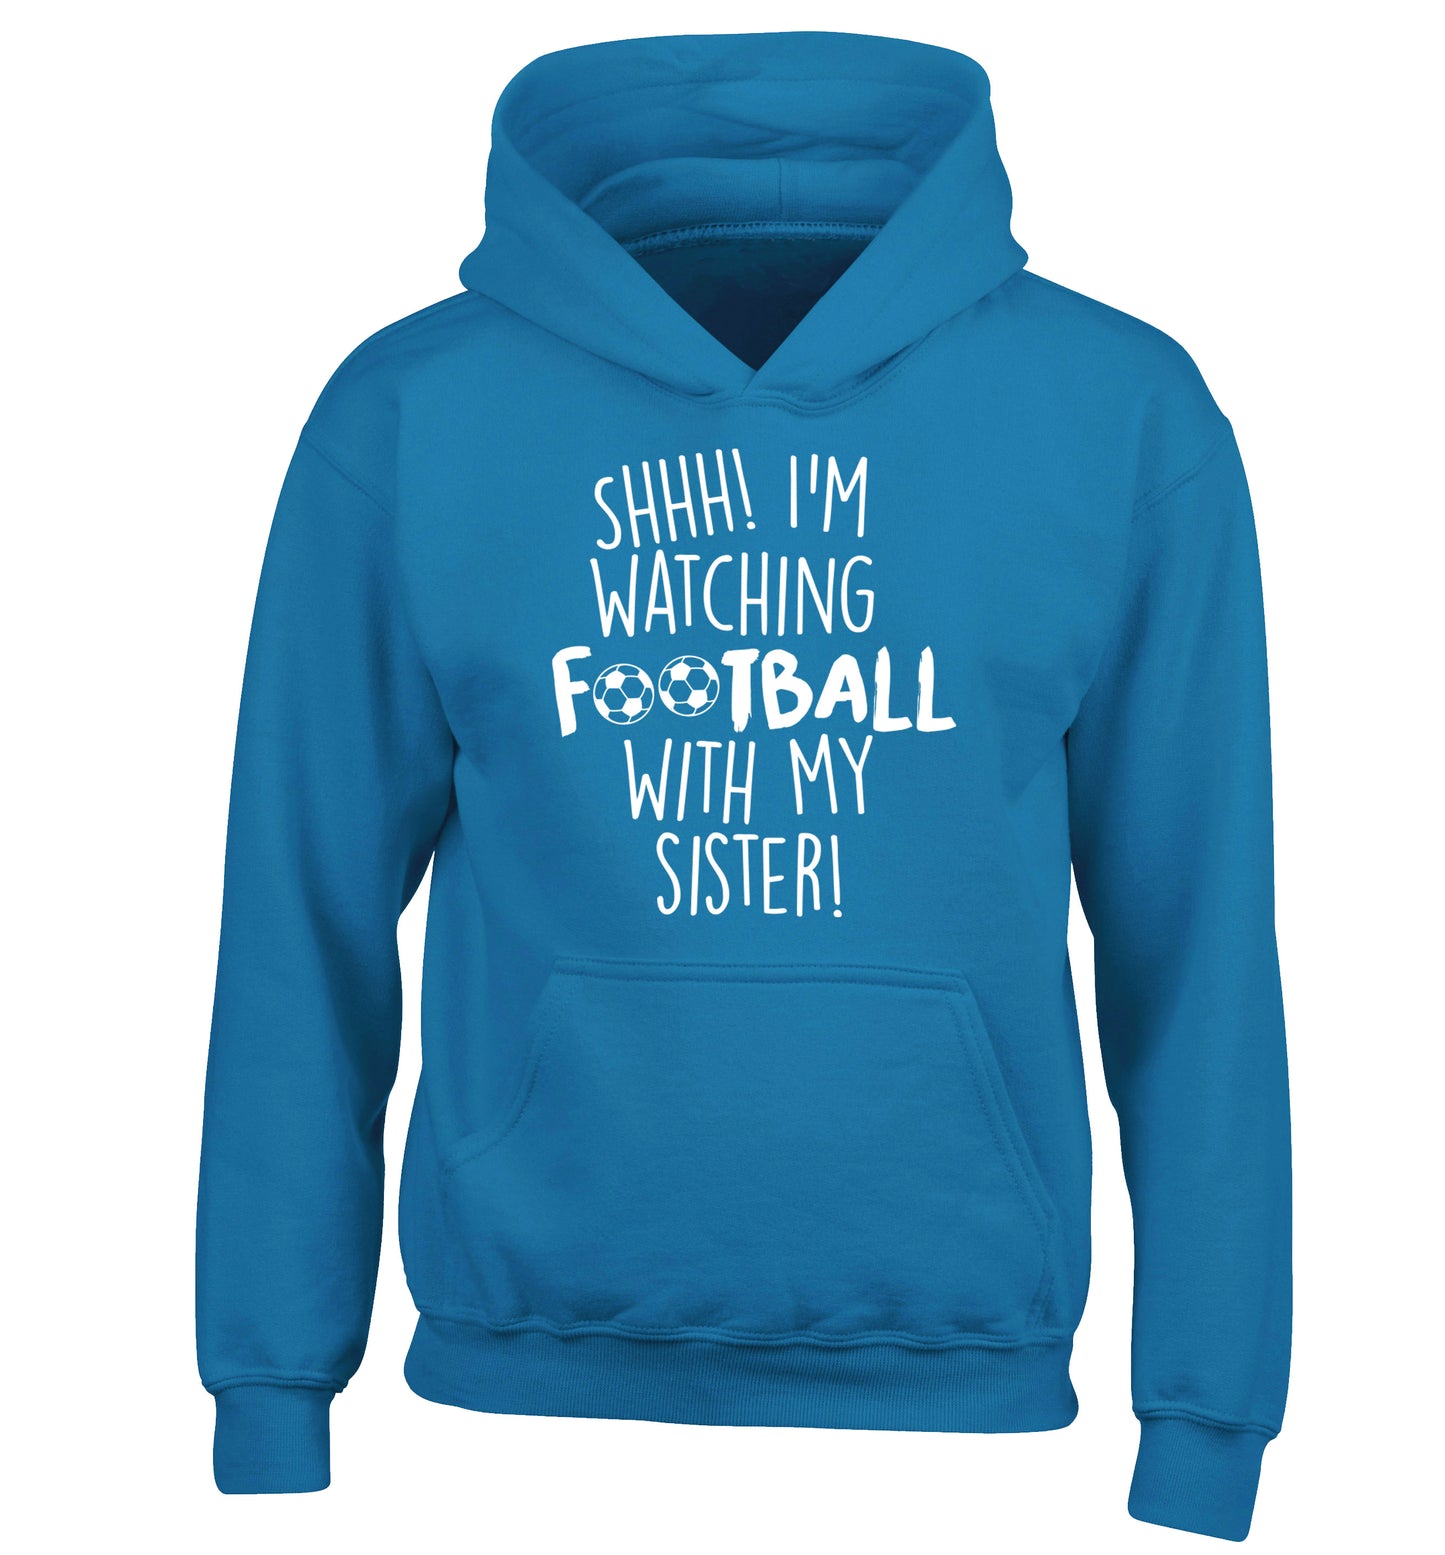 Shhh I'm watching football with my sister children's blue hoodie 12-14 Years